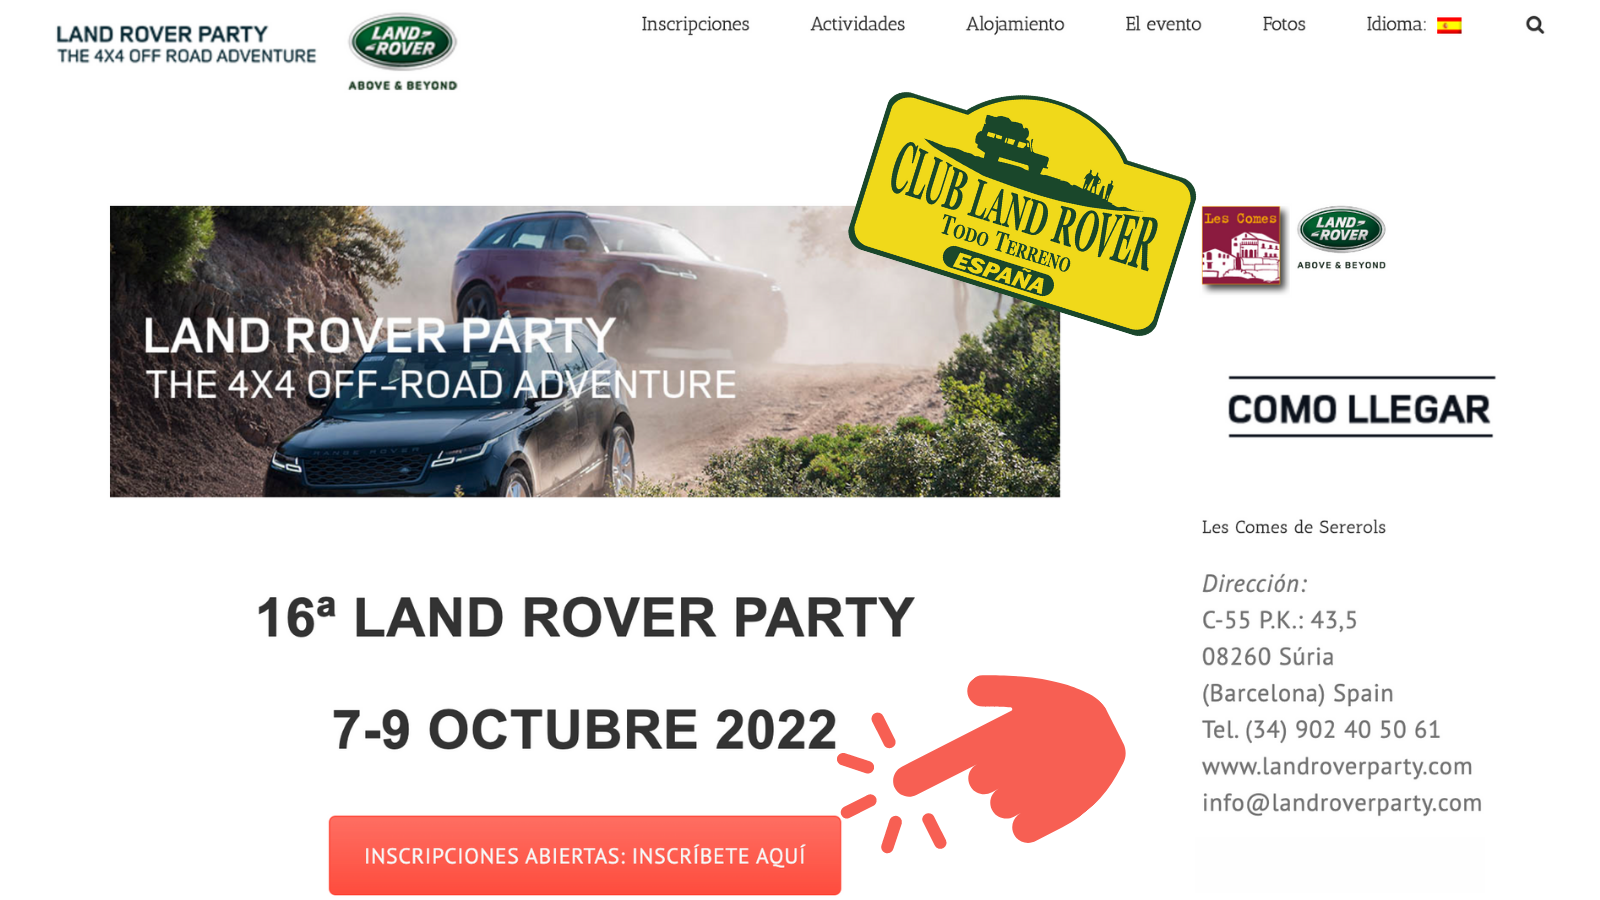 LAND ROVER PARTY 2022